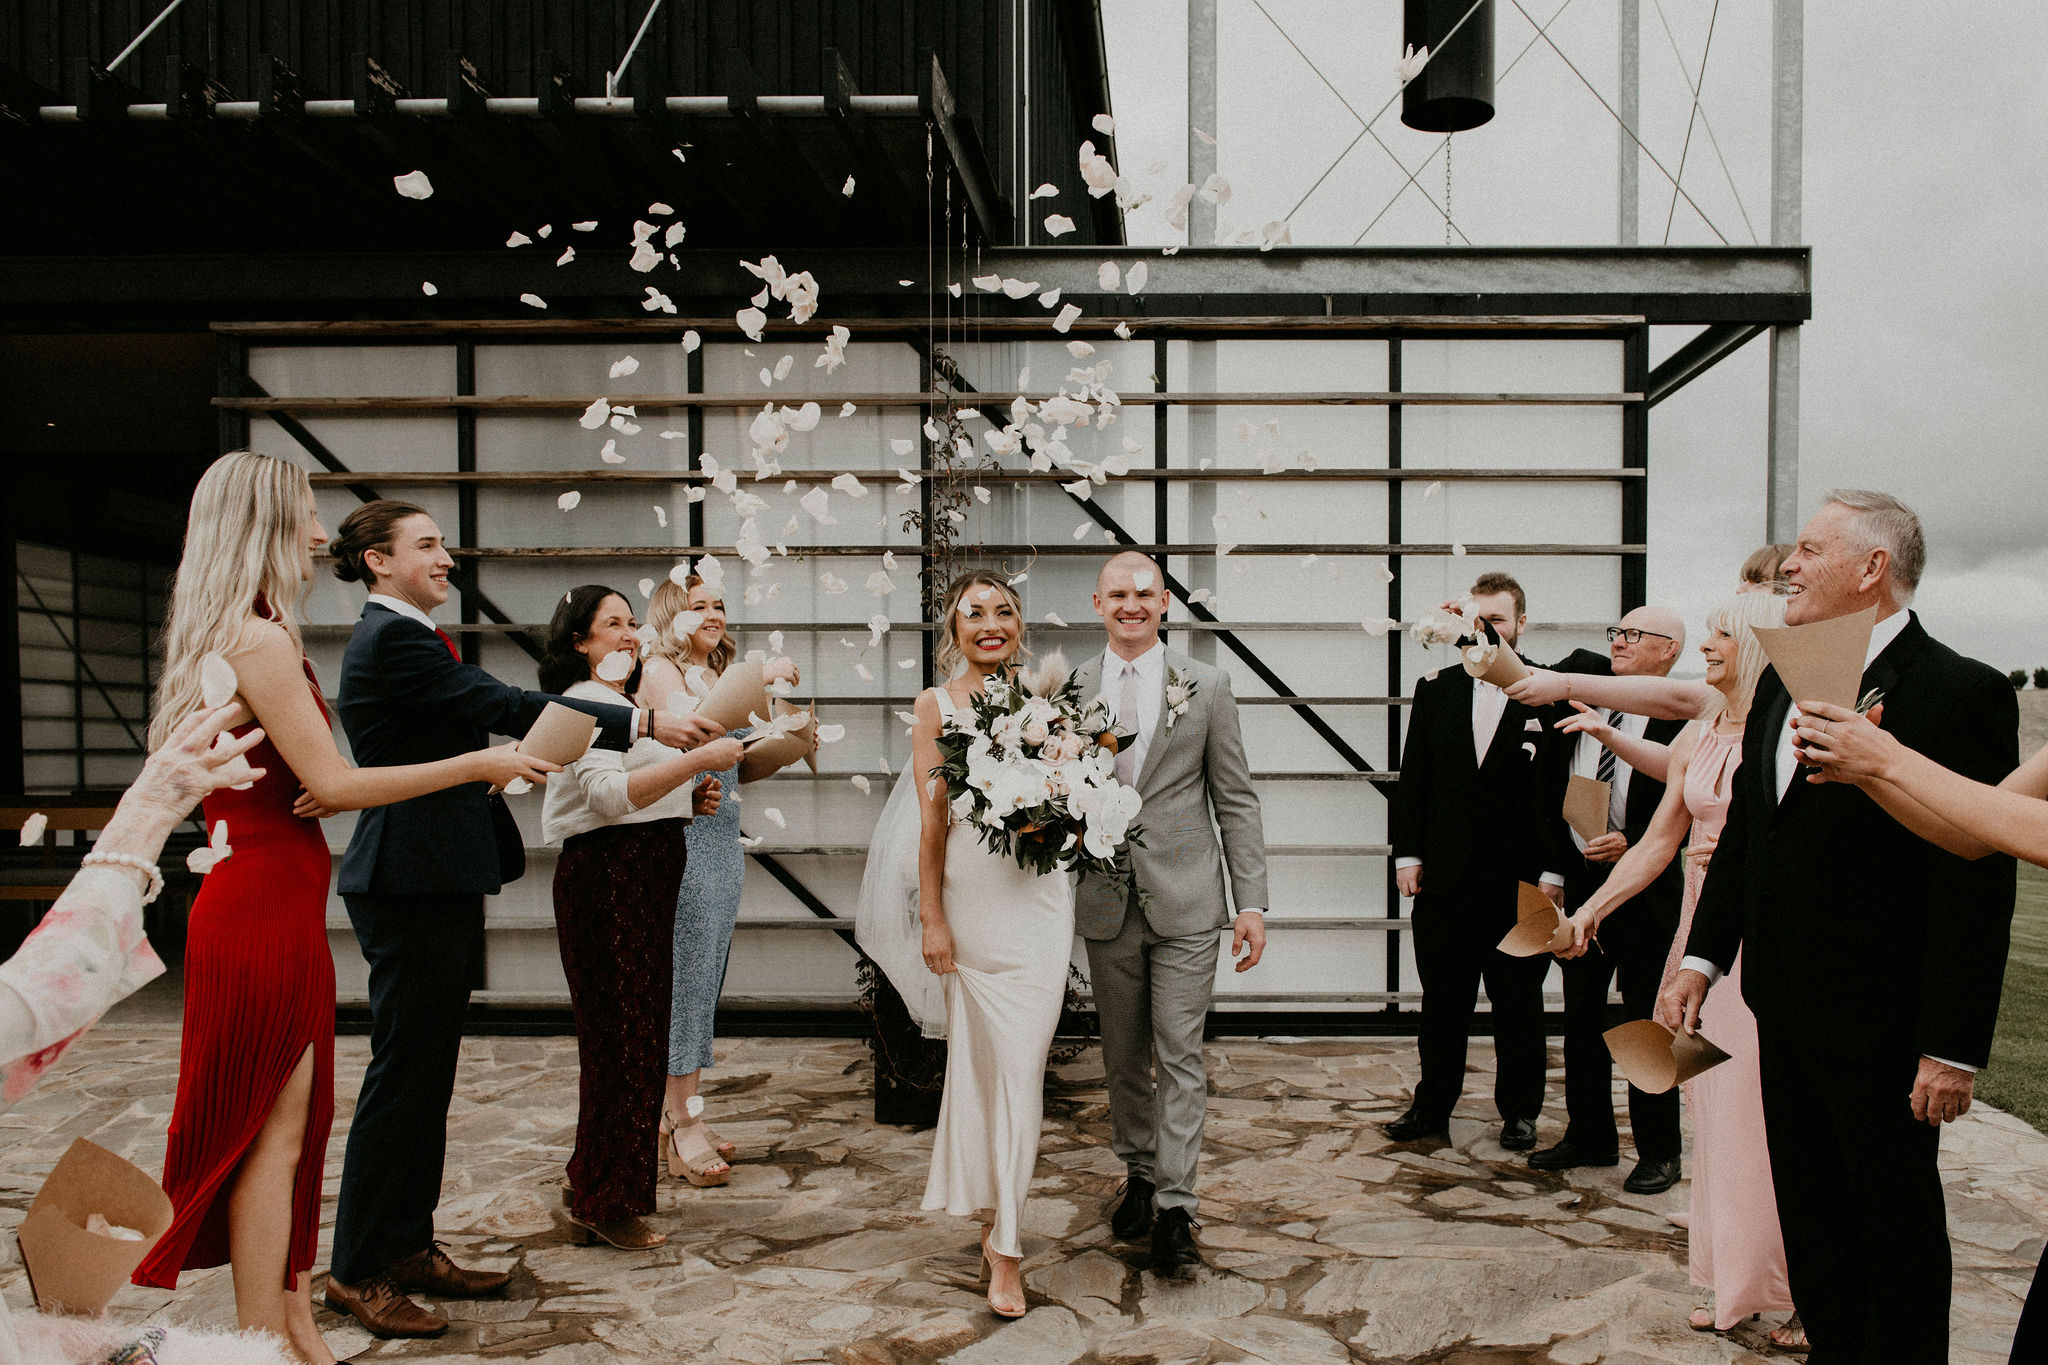 Throwing petals as couple exit ceremony Let's Elope Melbourne Celebrant beautiful ceremony and photography Elopement Packages Victoria Sarah Matler Photography Zonzo Estate Yarra Valley Winery Intimate Wedding Photos